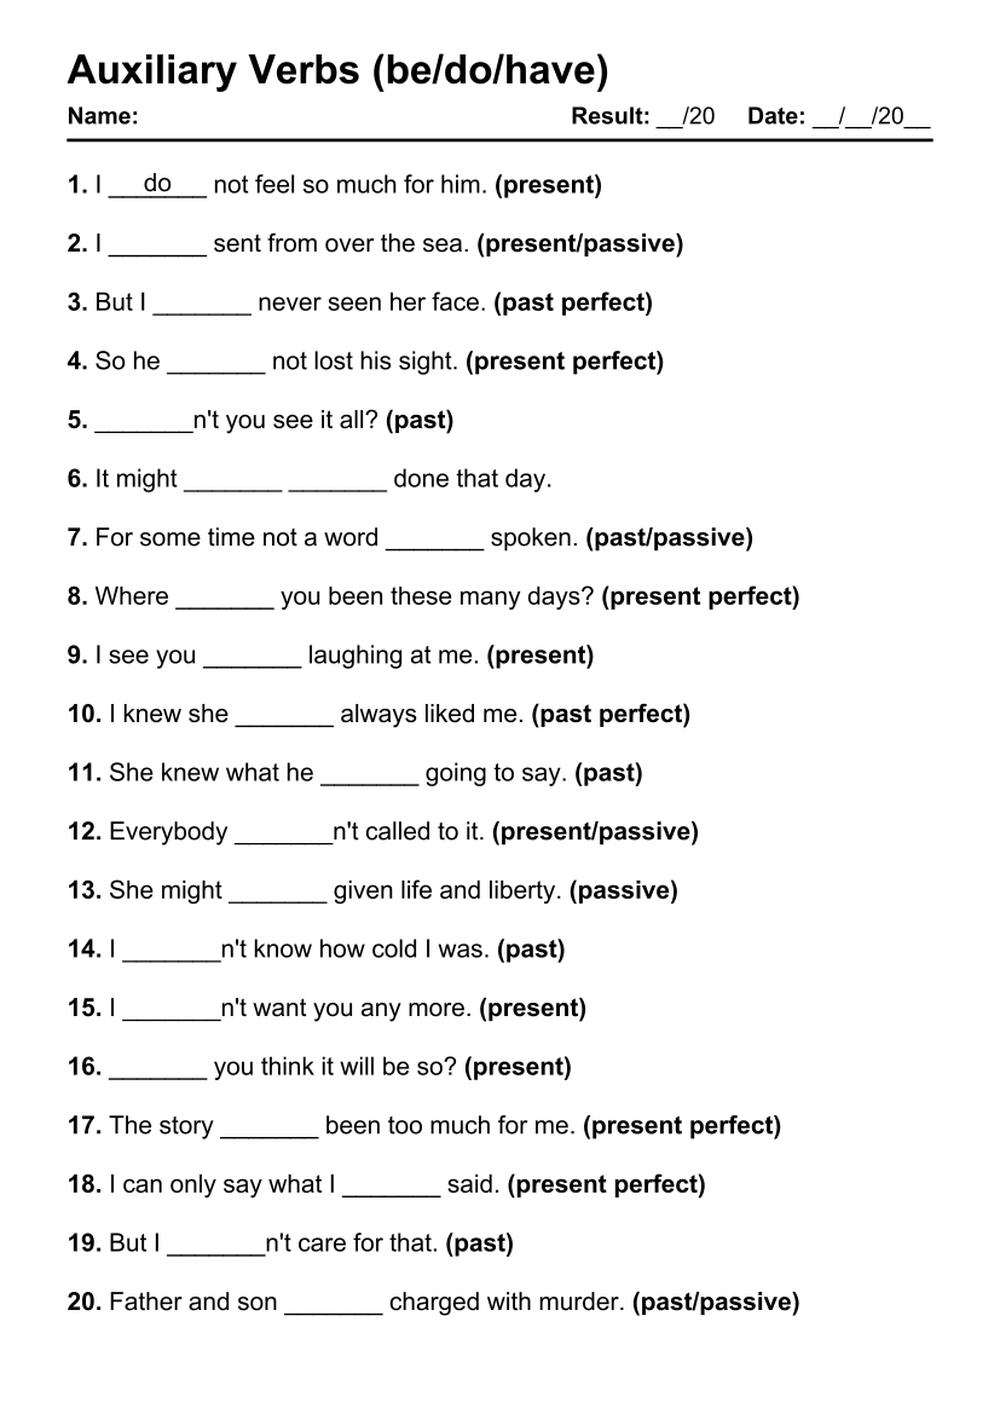 Printable Auxiliary Verbs Exercises - PDF Worksheet with Answers - Test 3